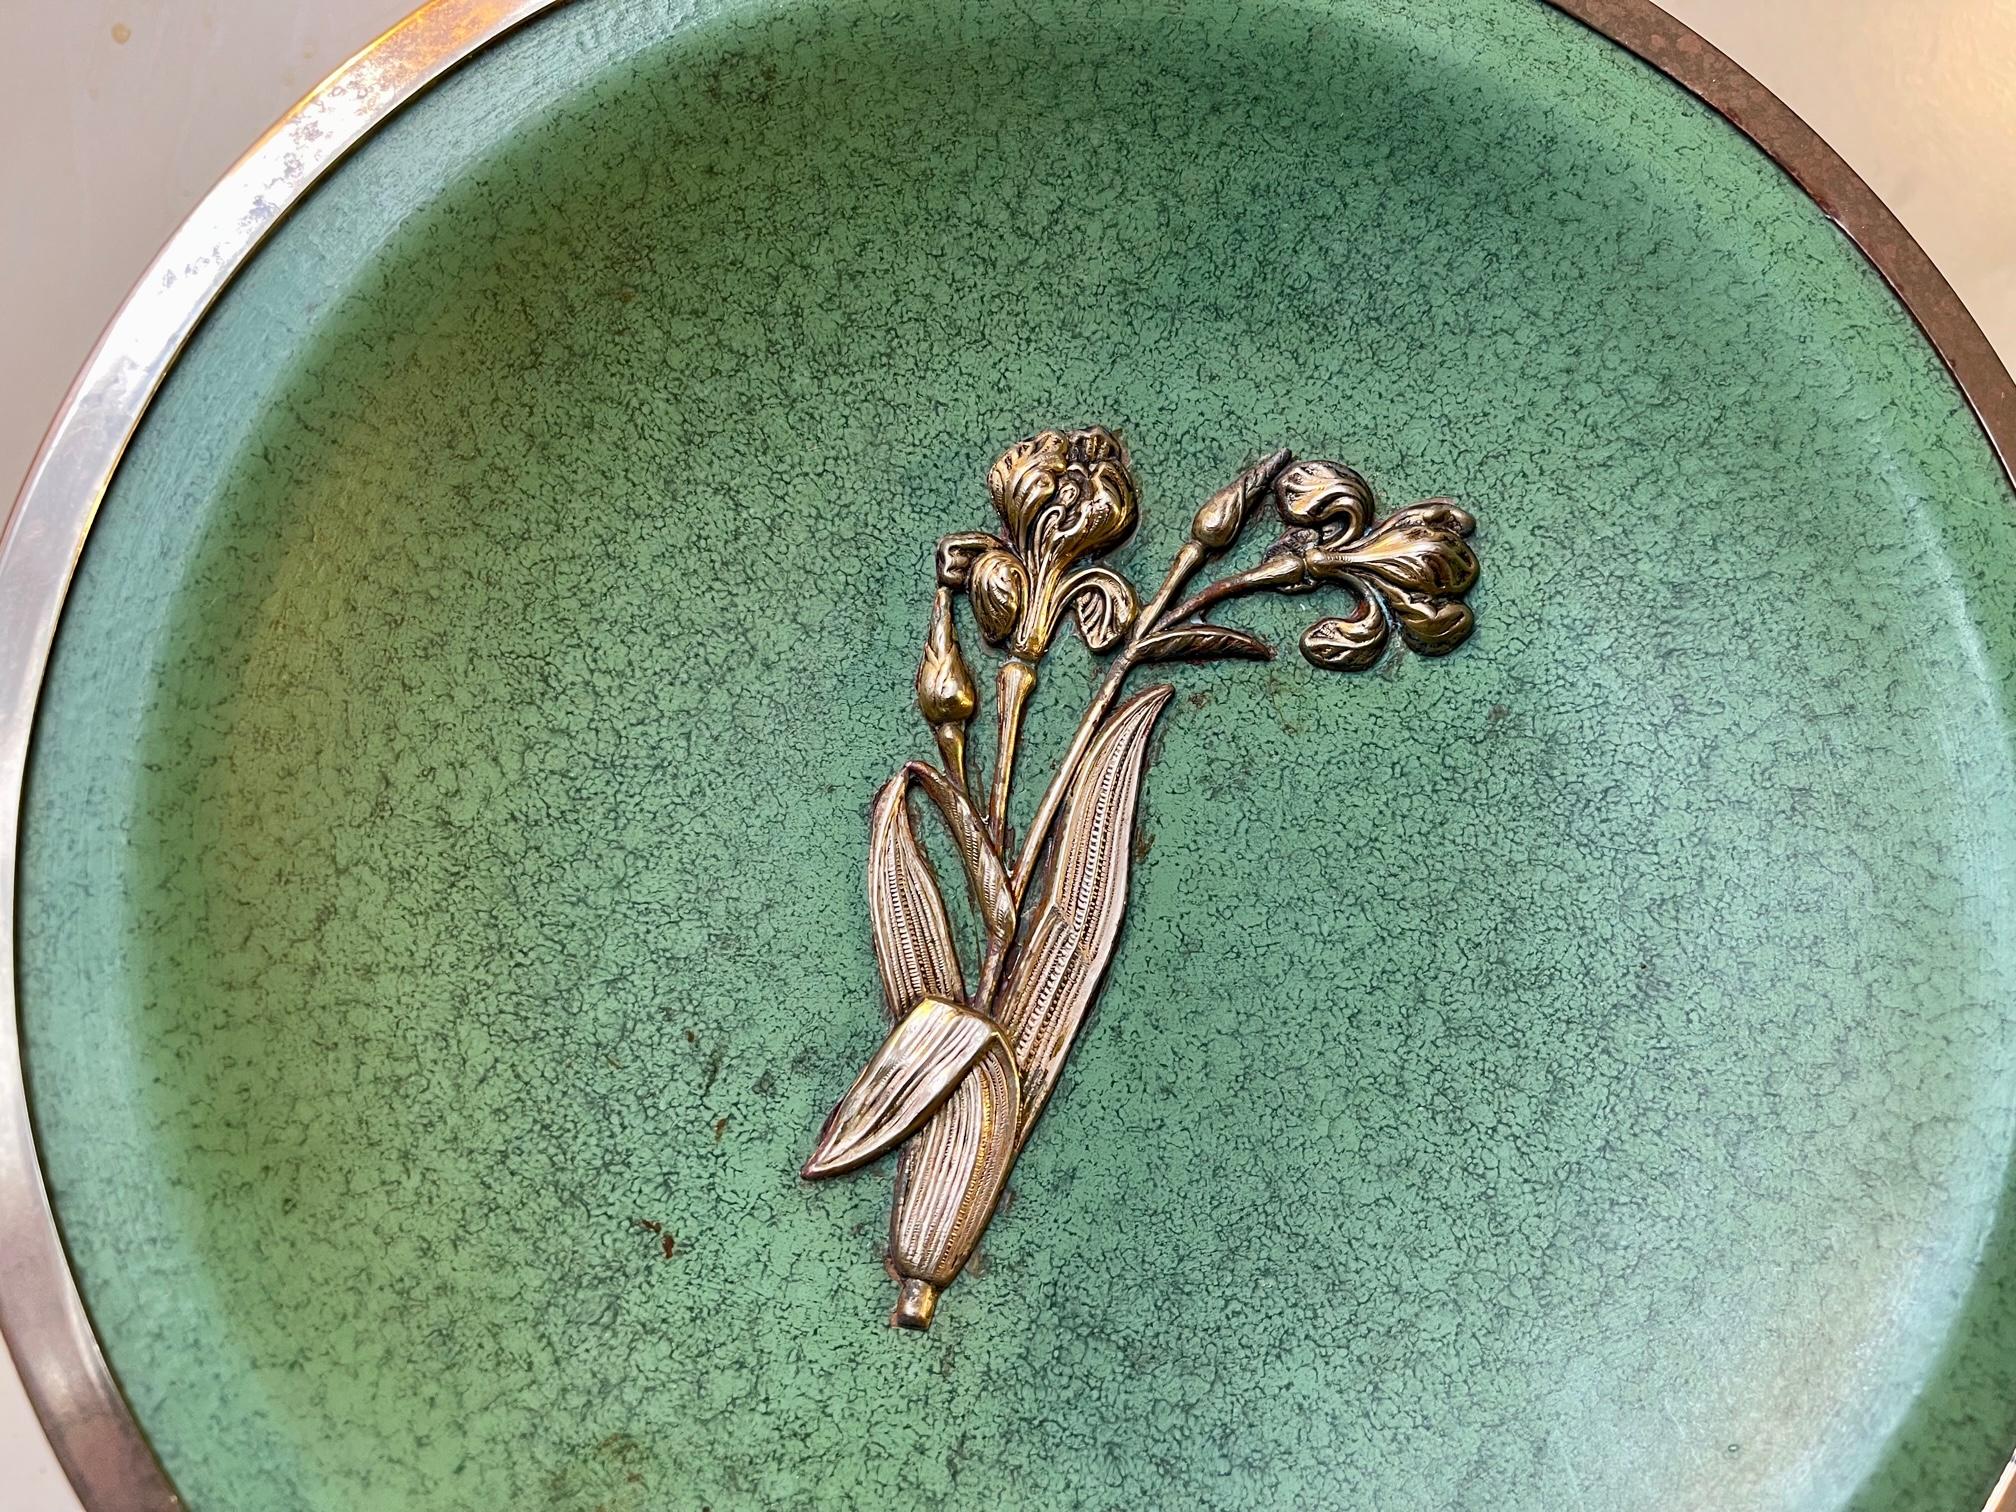 Unusual French stoneware dish decorated in green glaze and highlighted with bronze band and stylized flower. Unknown French ceramist/workshop circa 1920s or 30s in a style reminiscent of Jean Besnard. It has no markings. Measurements: D: 26.5 cm, H: